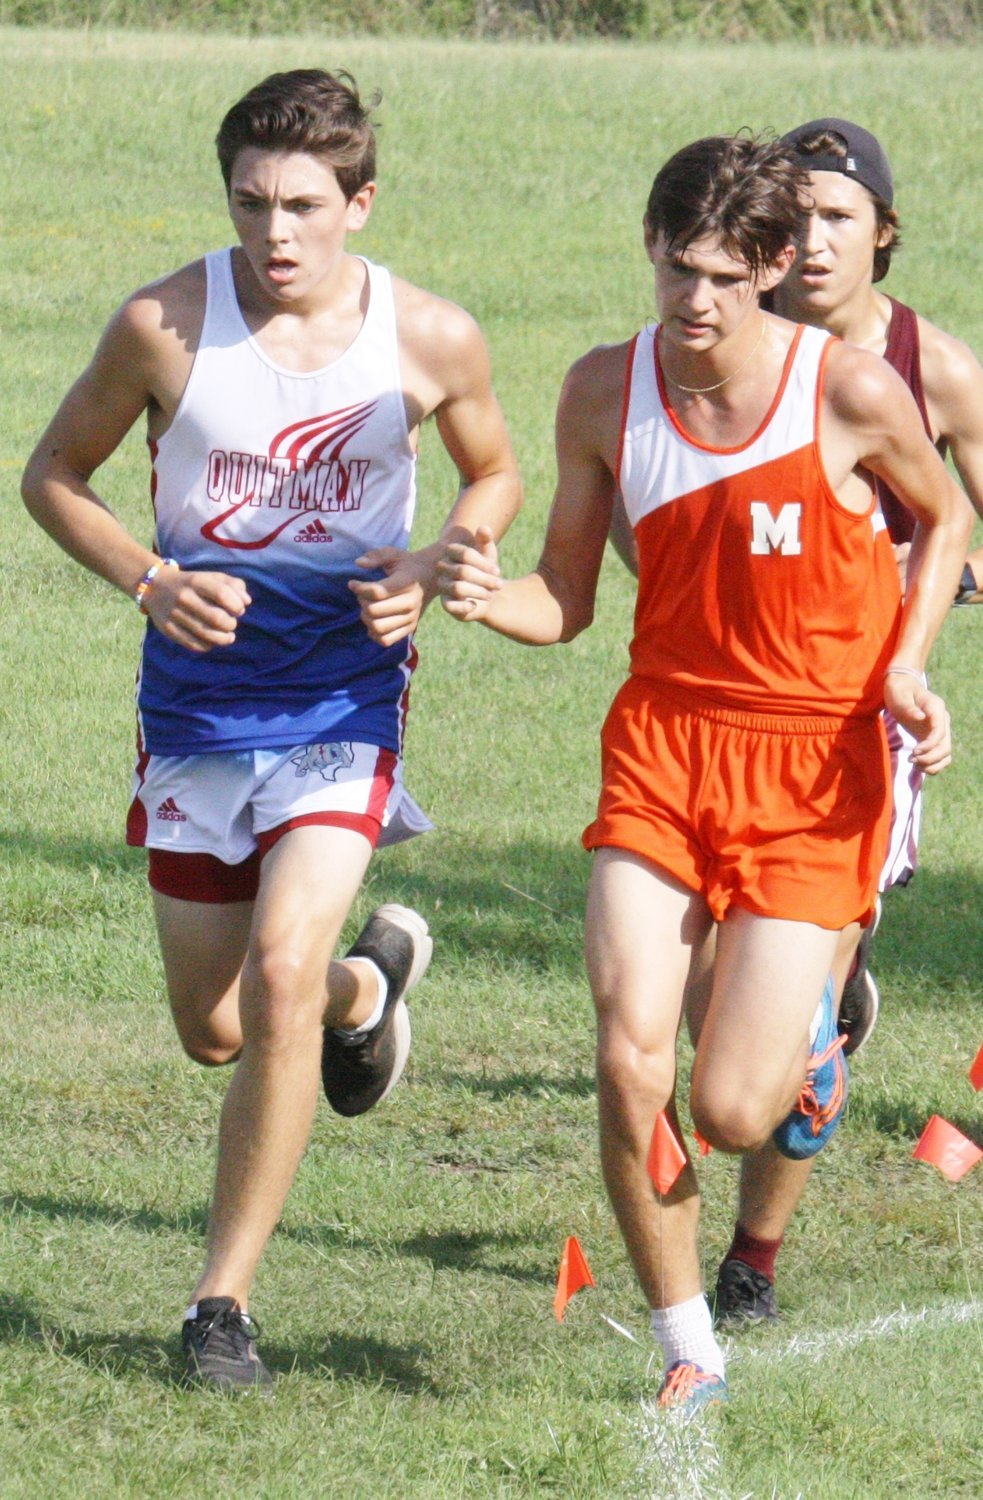 Quitman’s Brandon Jimenez and Mineola’s Dalton Crowson battle around a turn at the Mineola Invitational. Crowson finished 9th and Jimenez 10th in varsity boys competition.